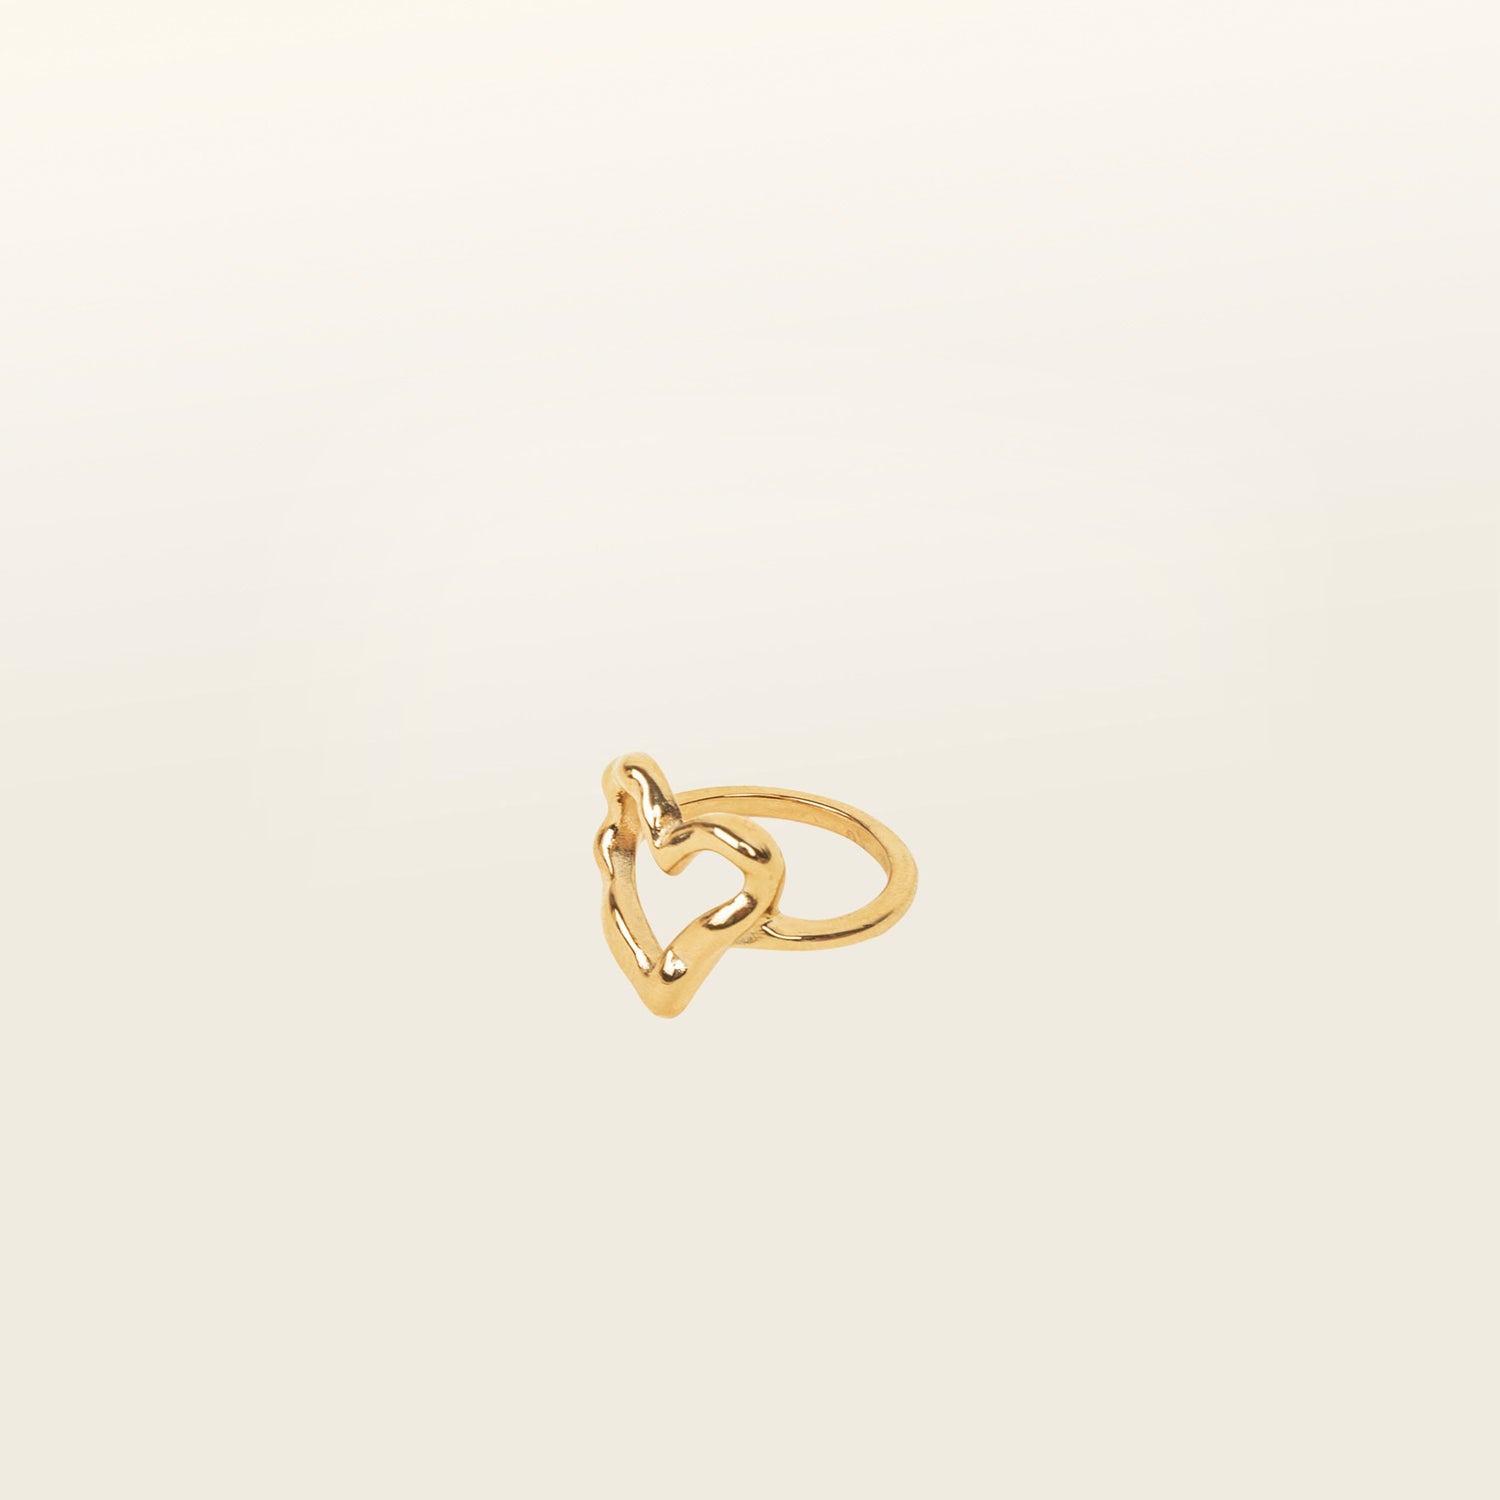 Image of the Ai Heart Ring in Gold is crafted with of 14K Gold Plated Stainless Steel, ensuring a durable and non-tarnishing construction. This piece is also water resistant and made without Lead, Nickel, or Cadmium for added safety. This is a single ring, with no ability to adjust.